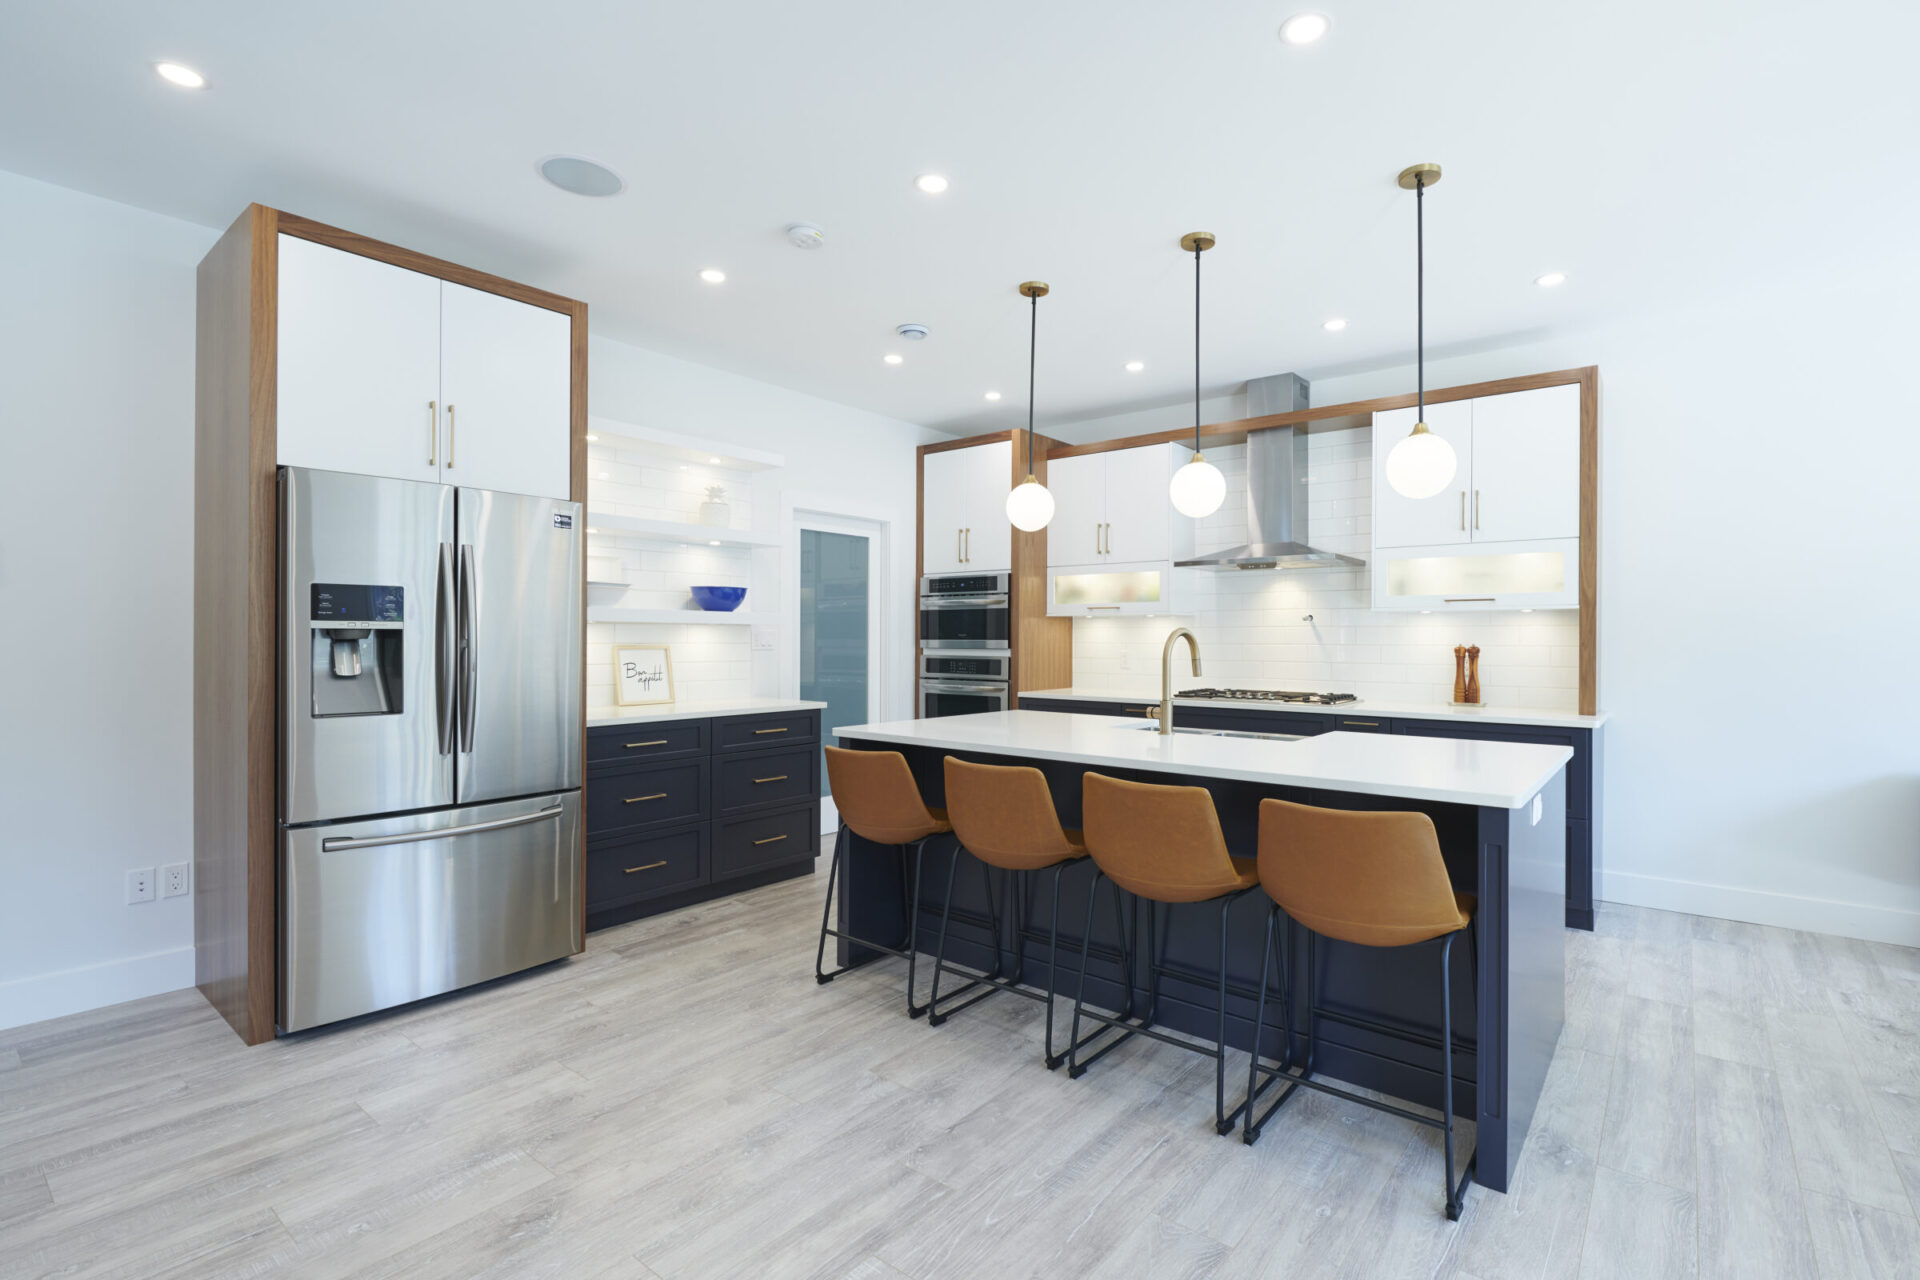 A modern kitchen with stainless steel appliances, white countertops, dark cabinets, and a central island with brown stools under pendant lights.